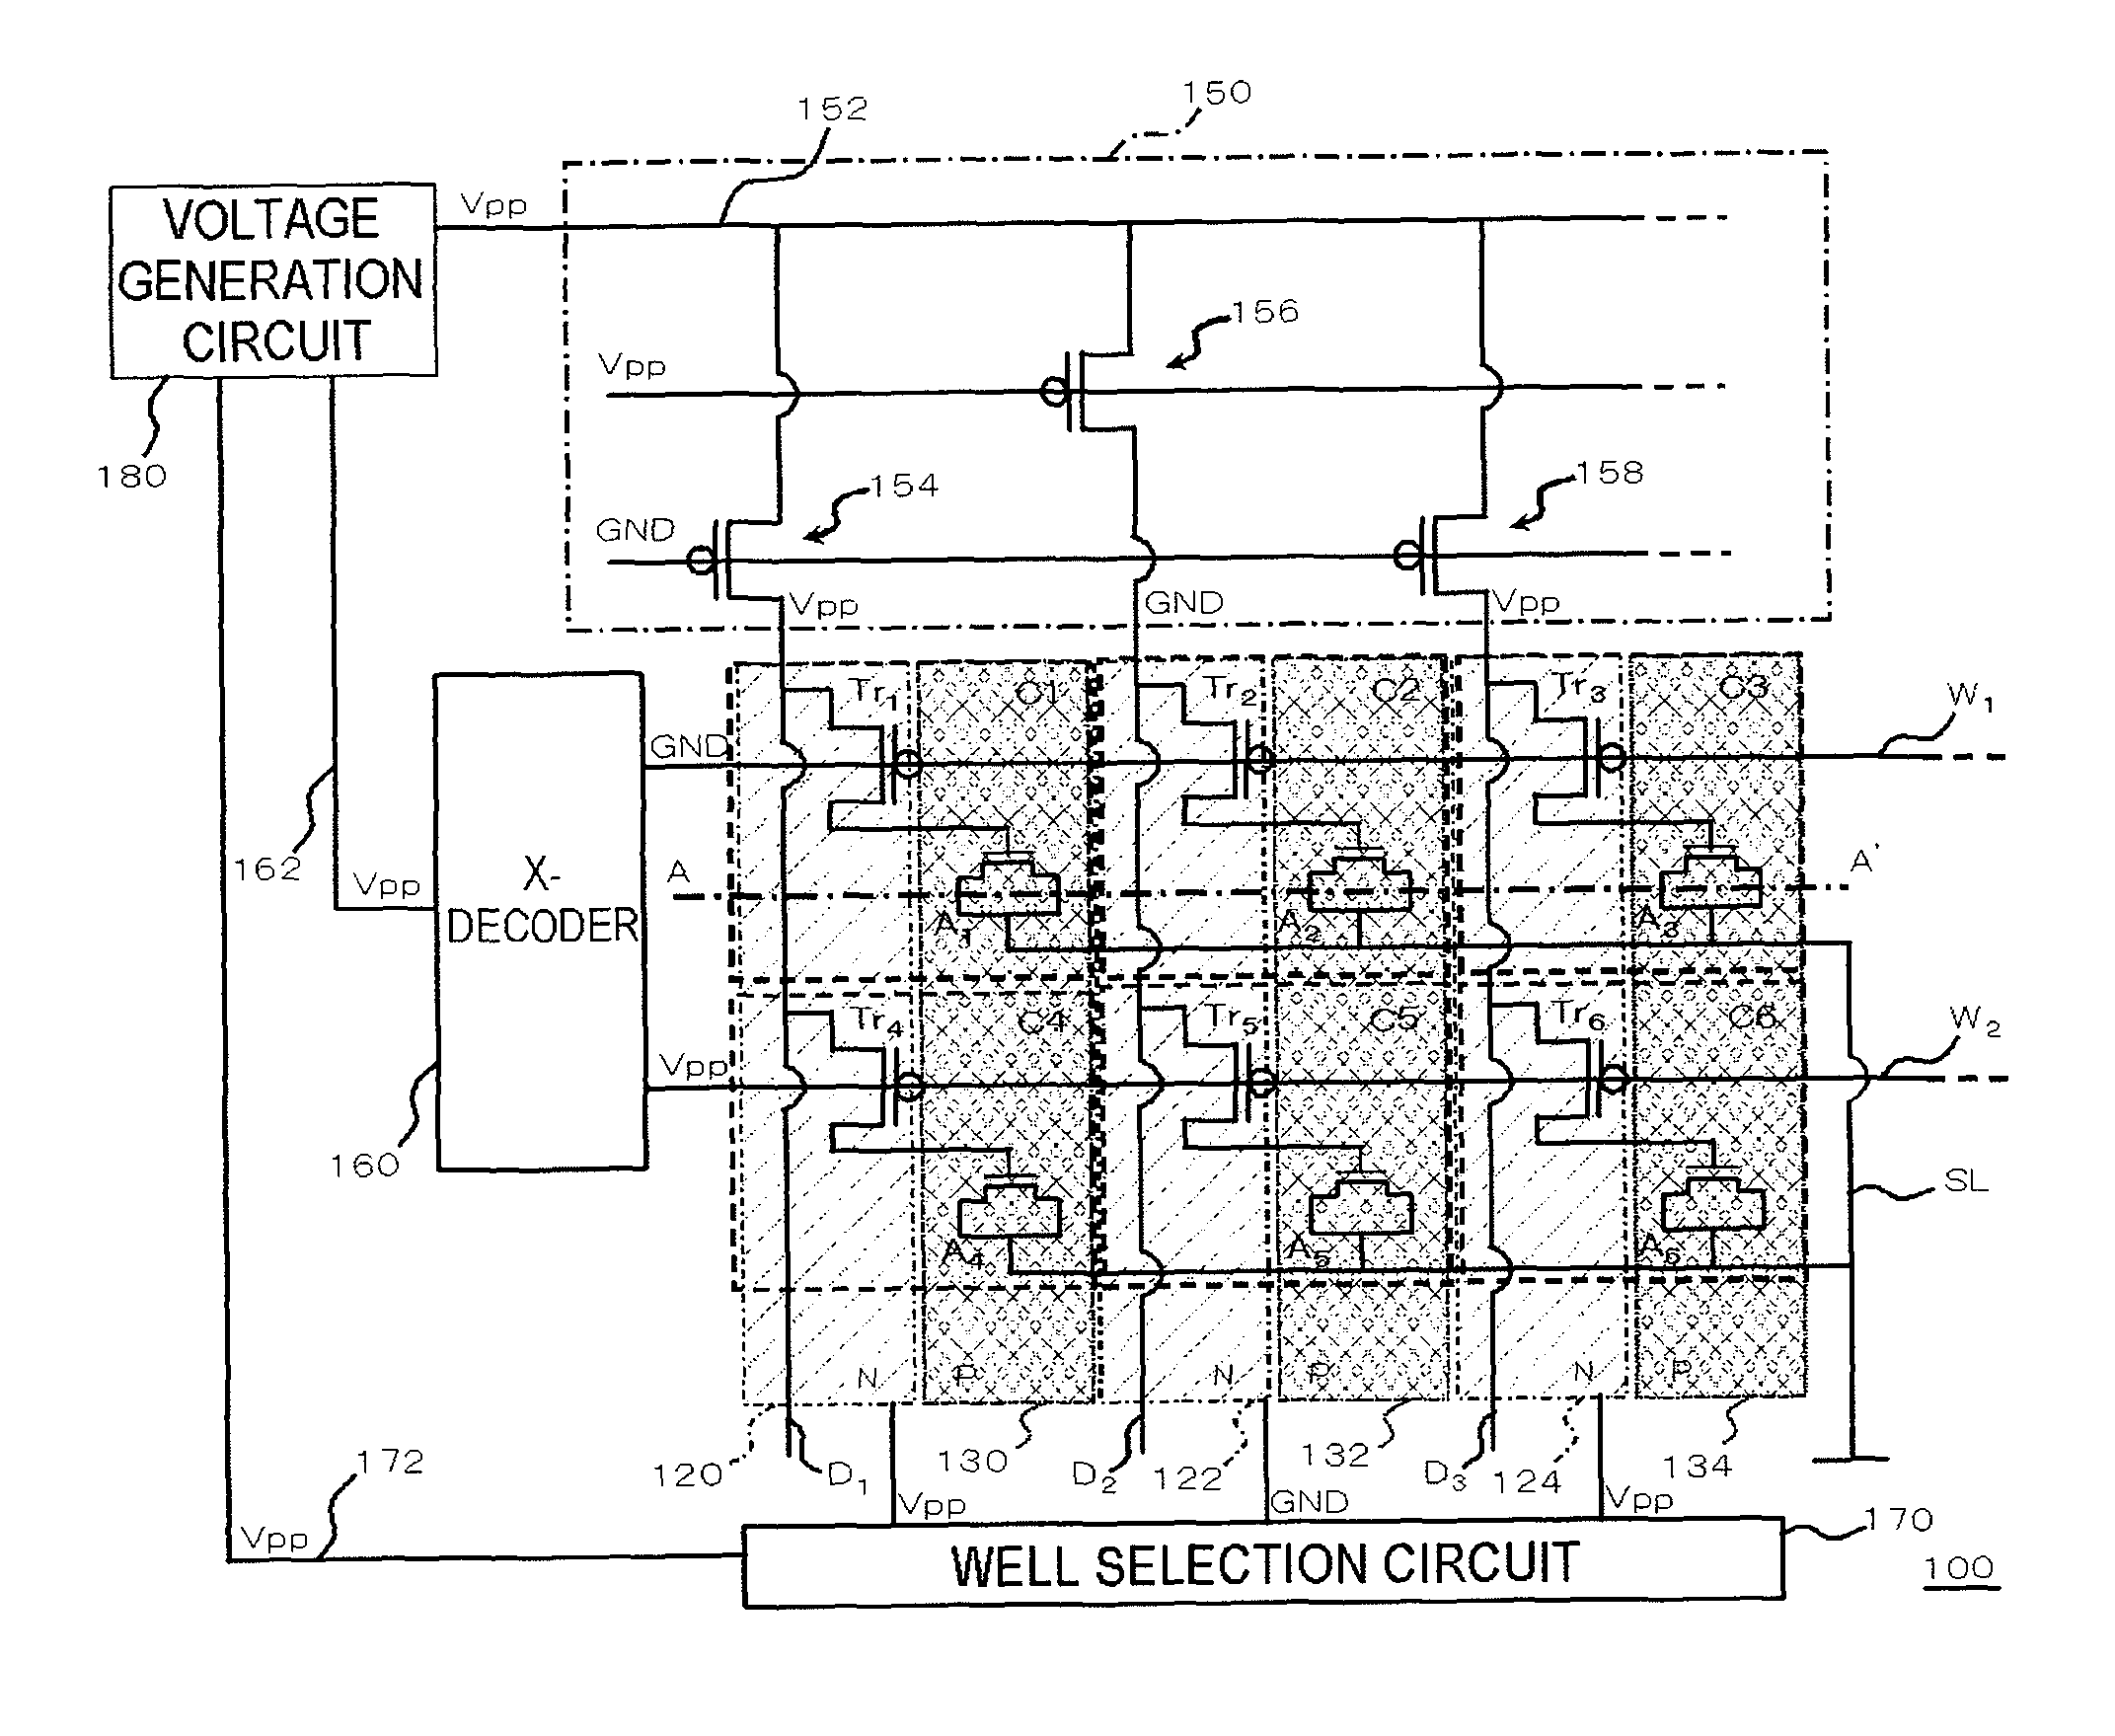 Semiconductor memory device and a method of controlling a semiconductor memory device